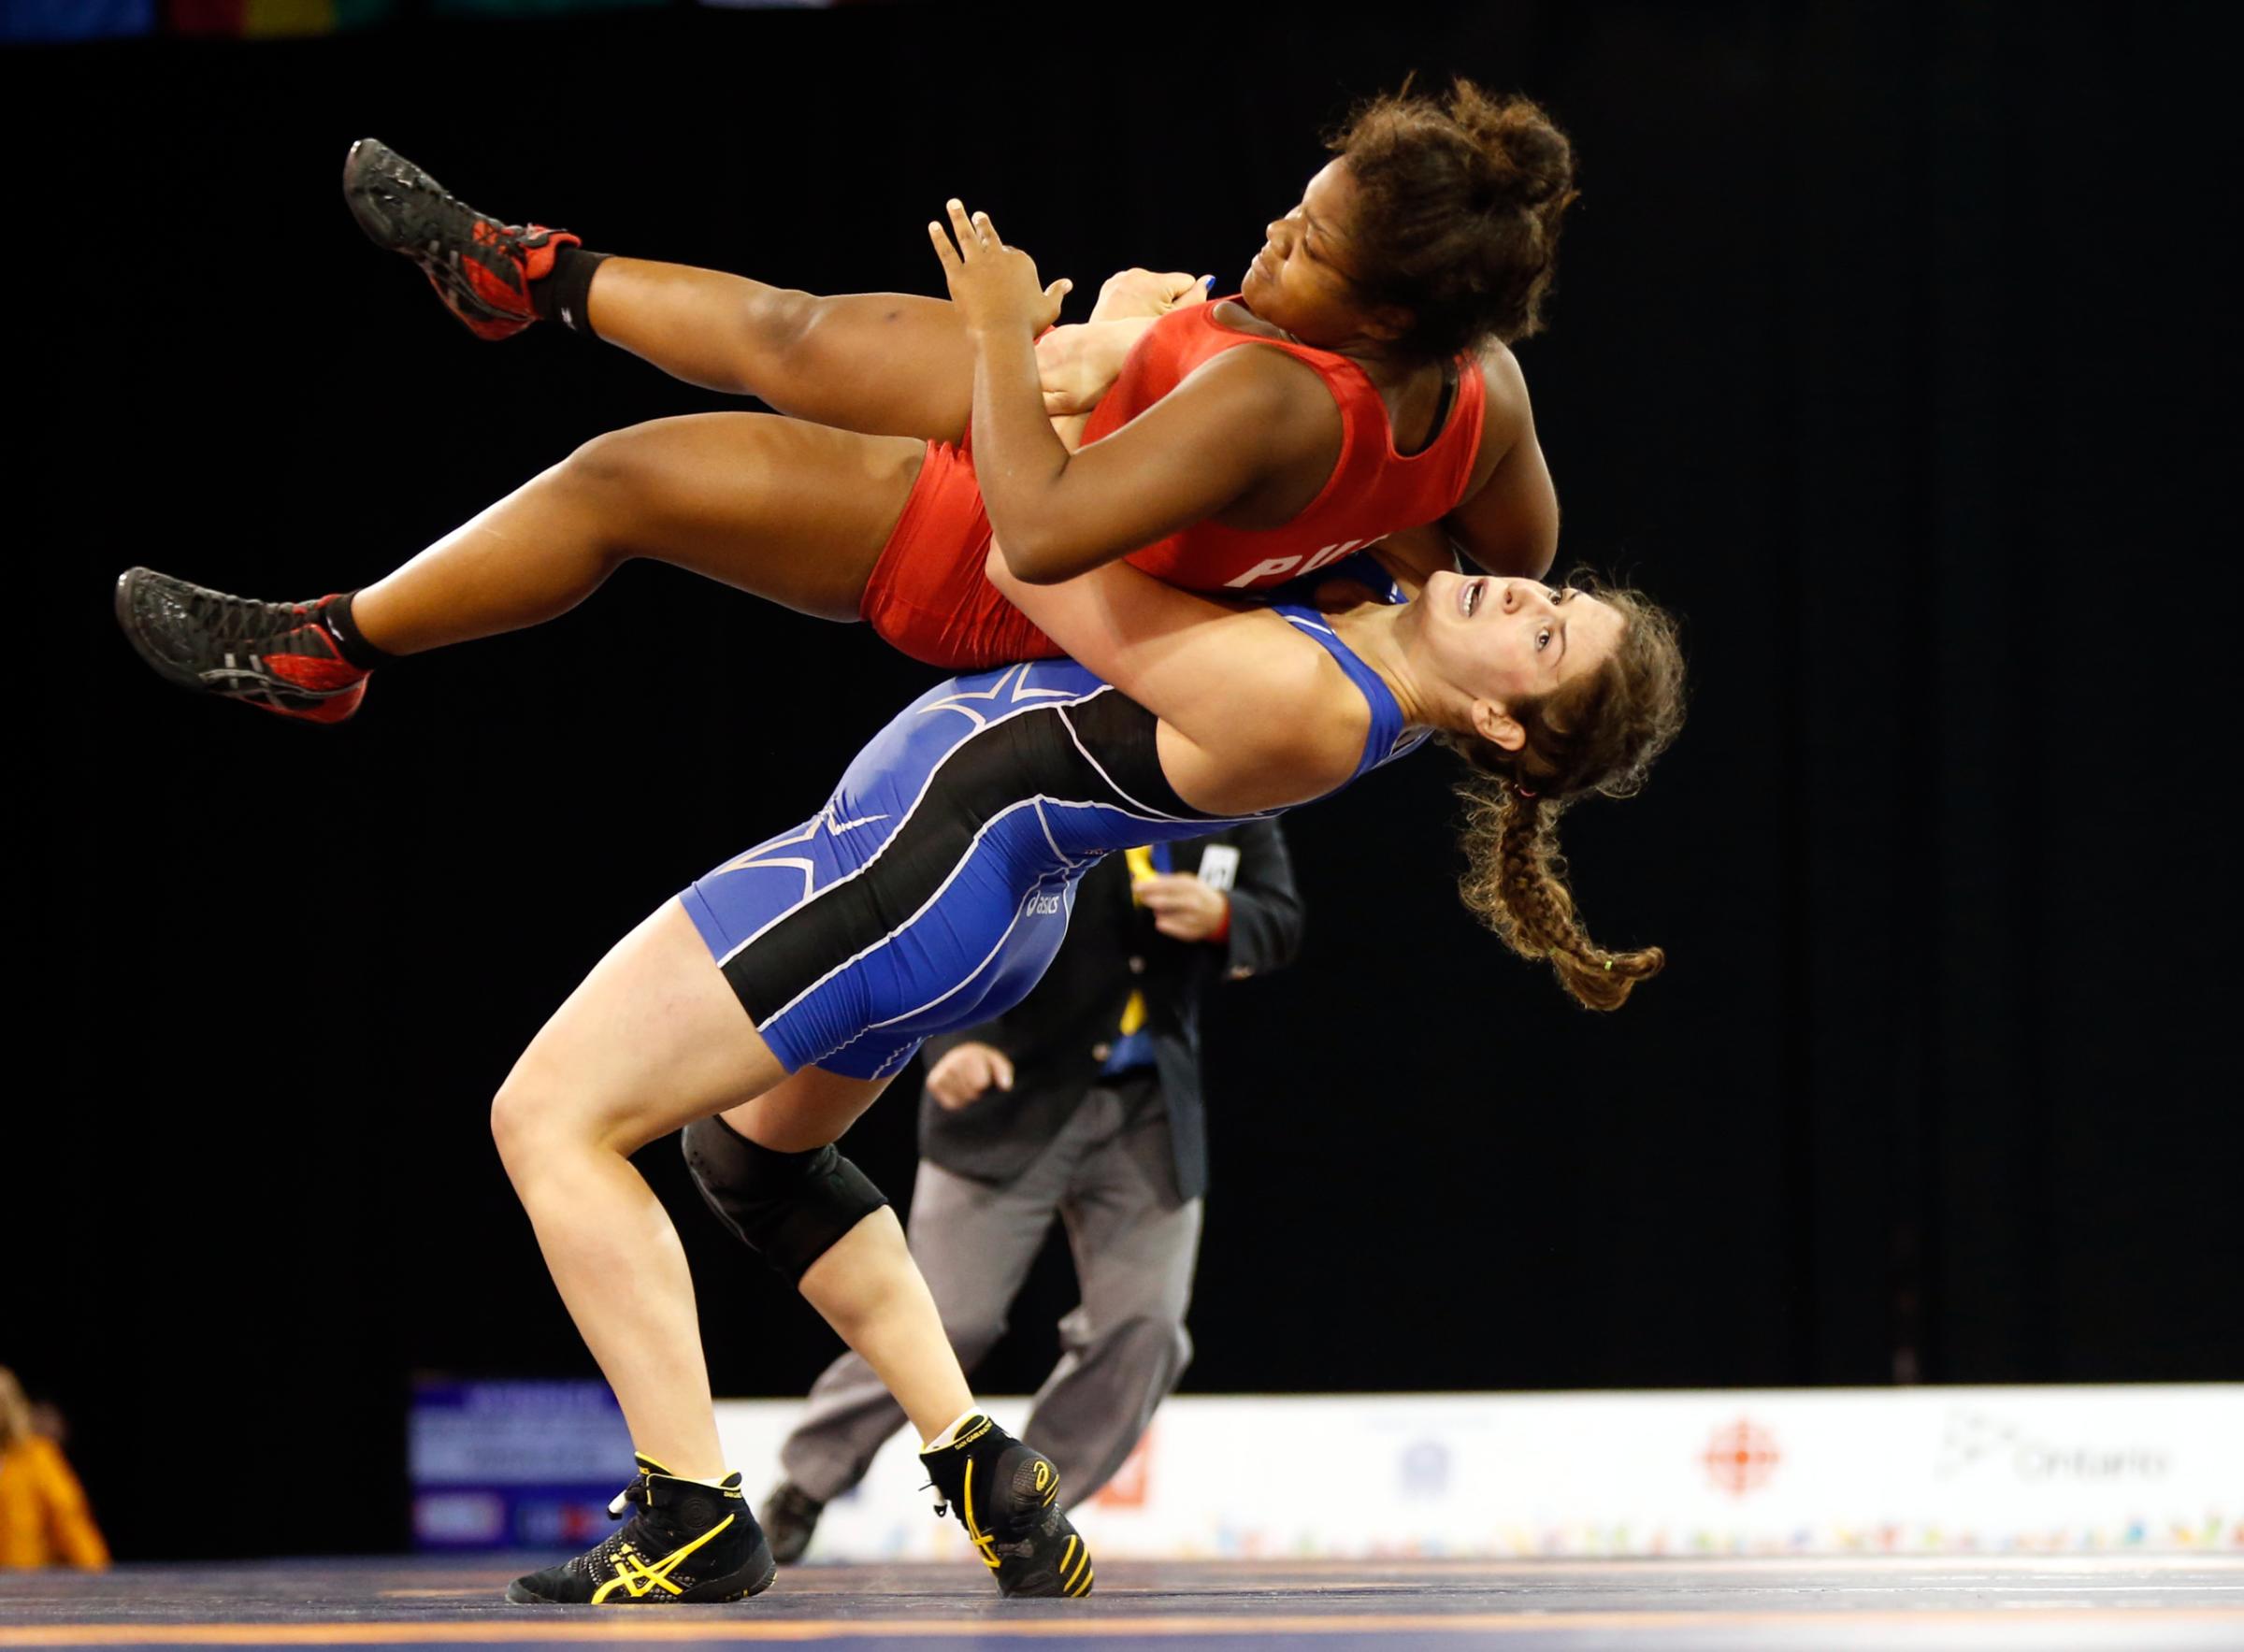 Adeline Gray—A three-time world champion and daughter of a Denver police officer, Gray, 25, is a favorite to win America’s first-ever gold in women’s wrestling. “Where I feel creative,” she says, “is on the wrestling mat.”